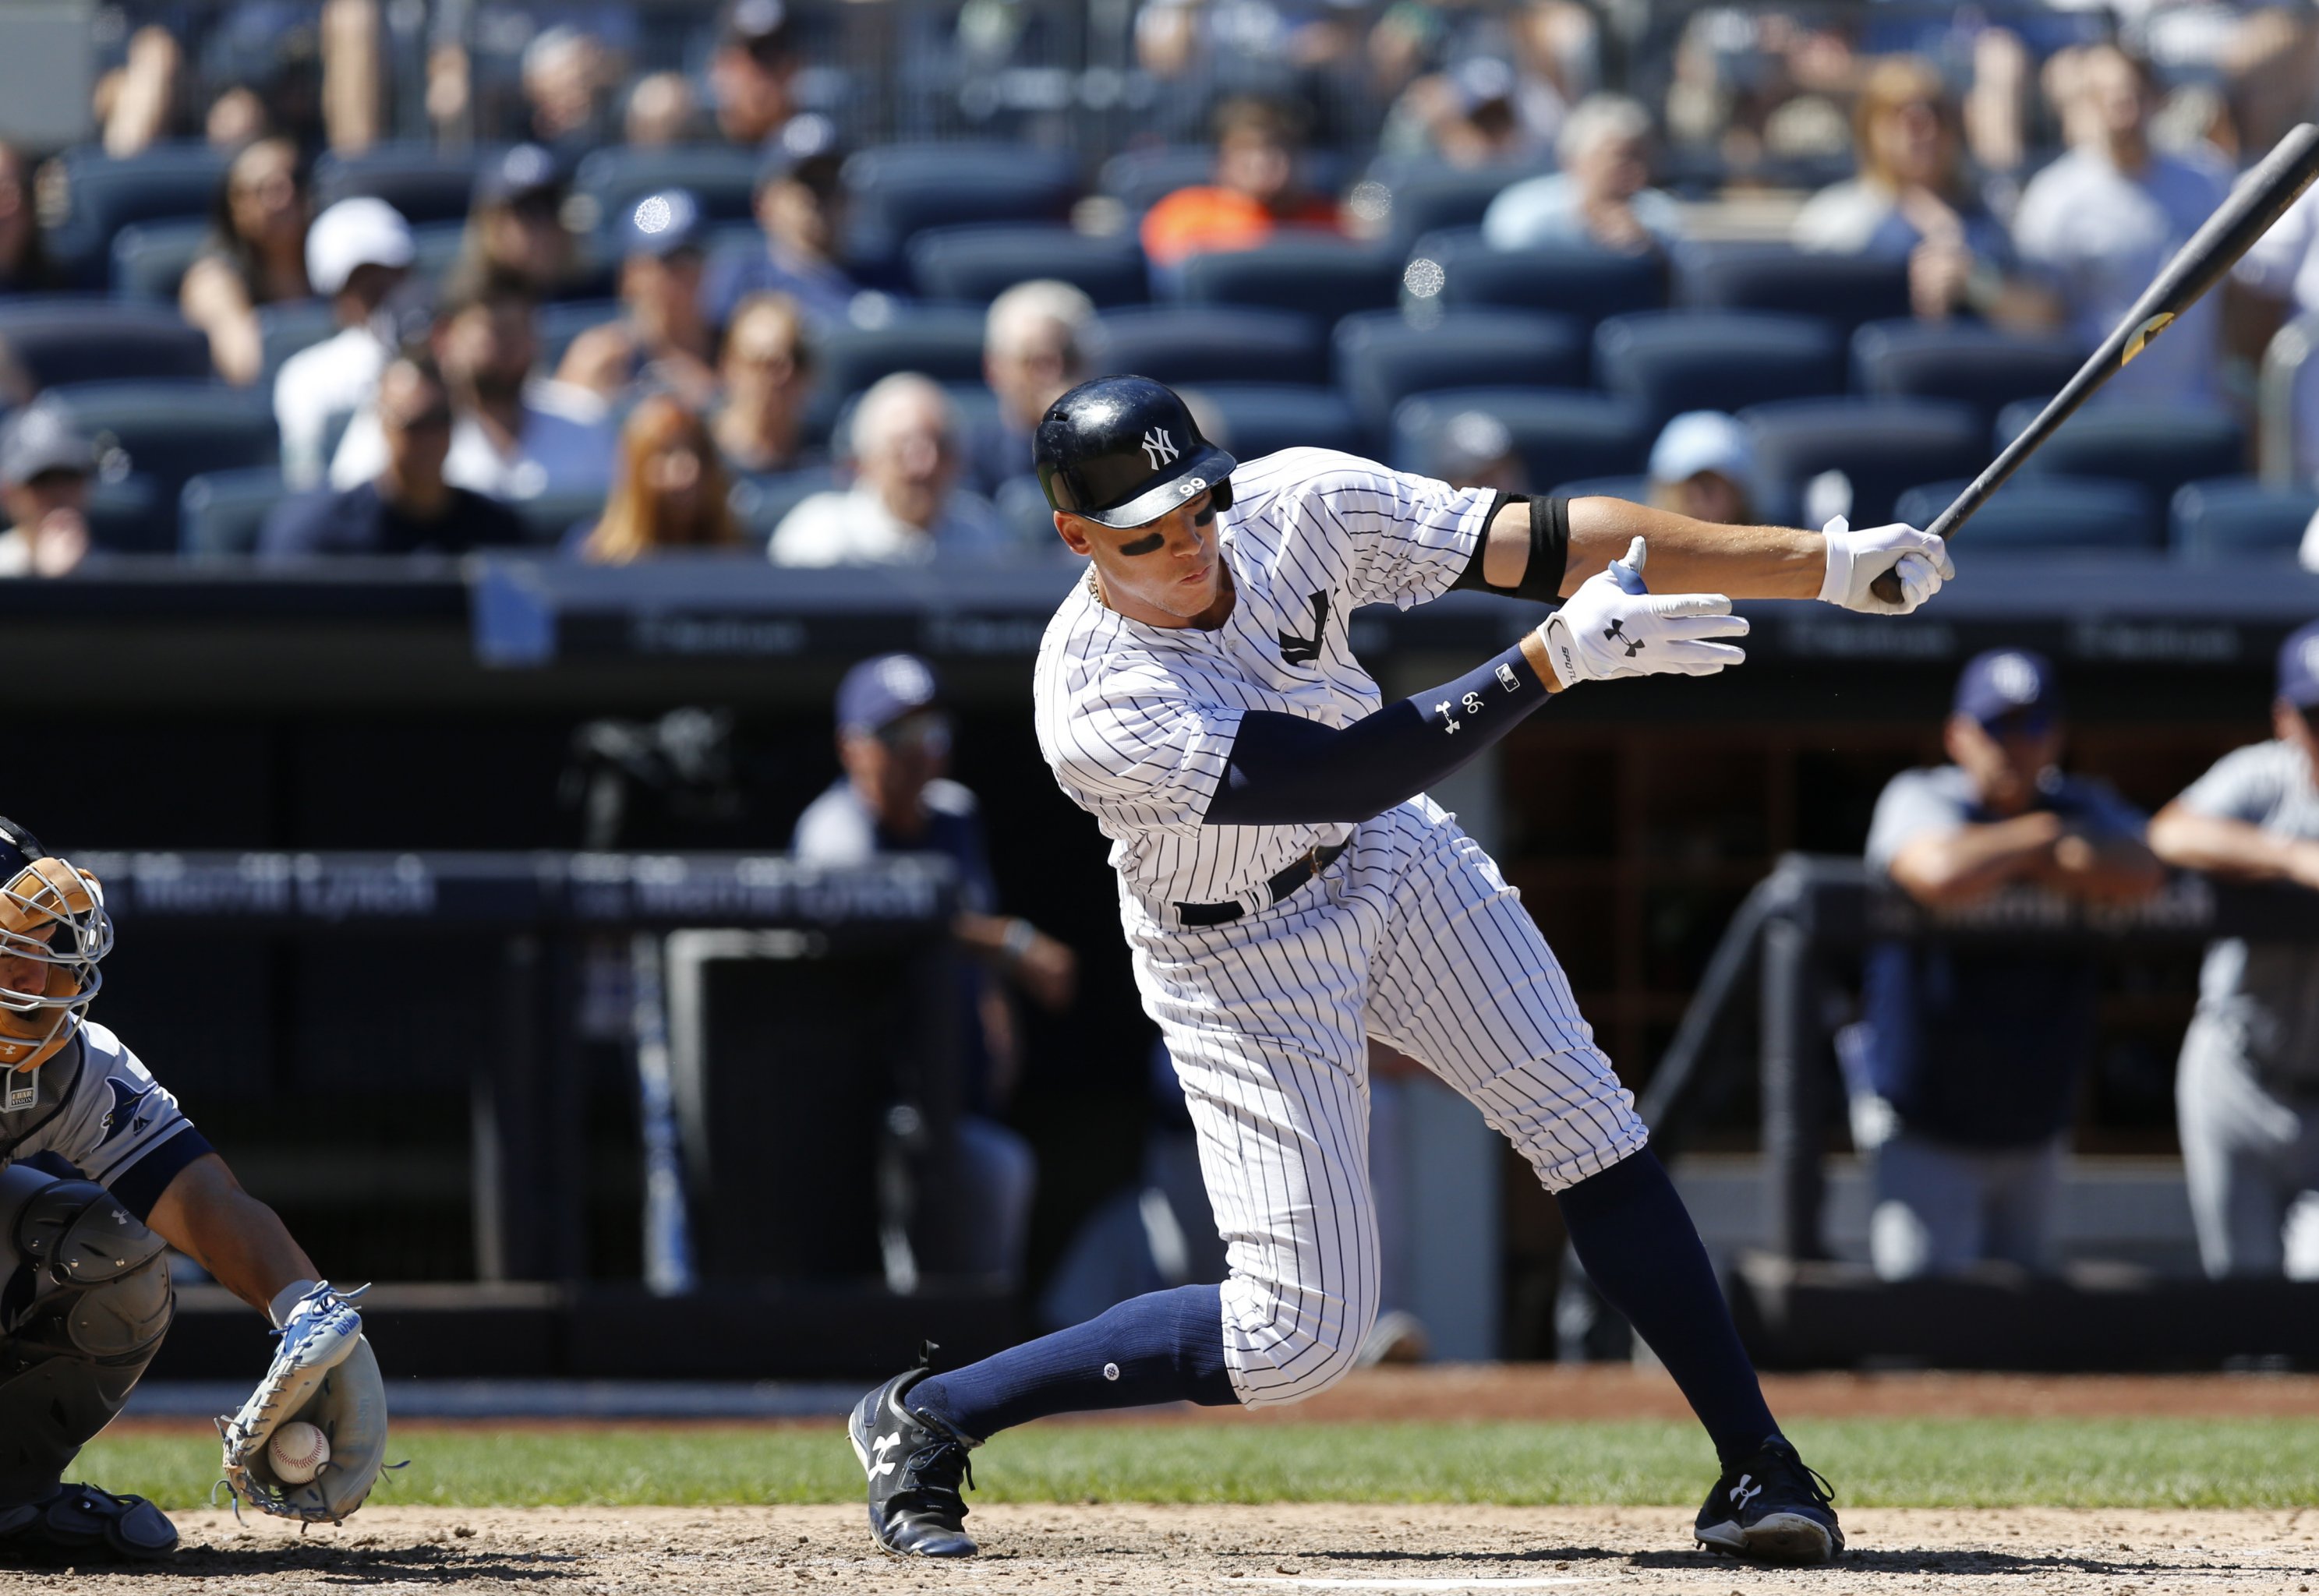 How 25-Year-Old Aaron Judge Became the Heir to Derek Jeter As the